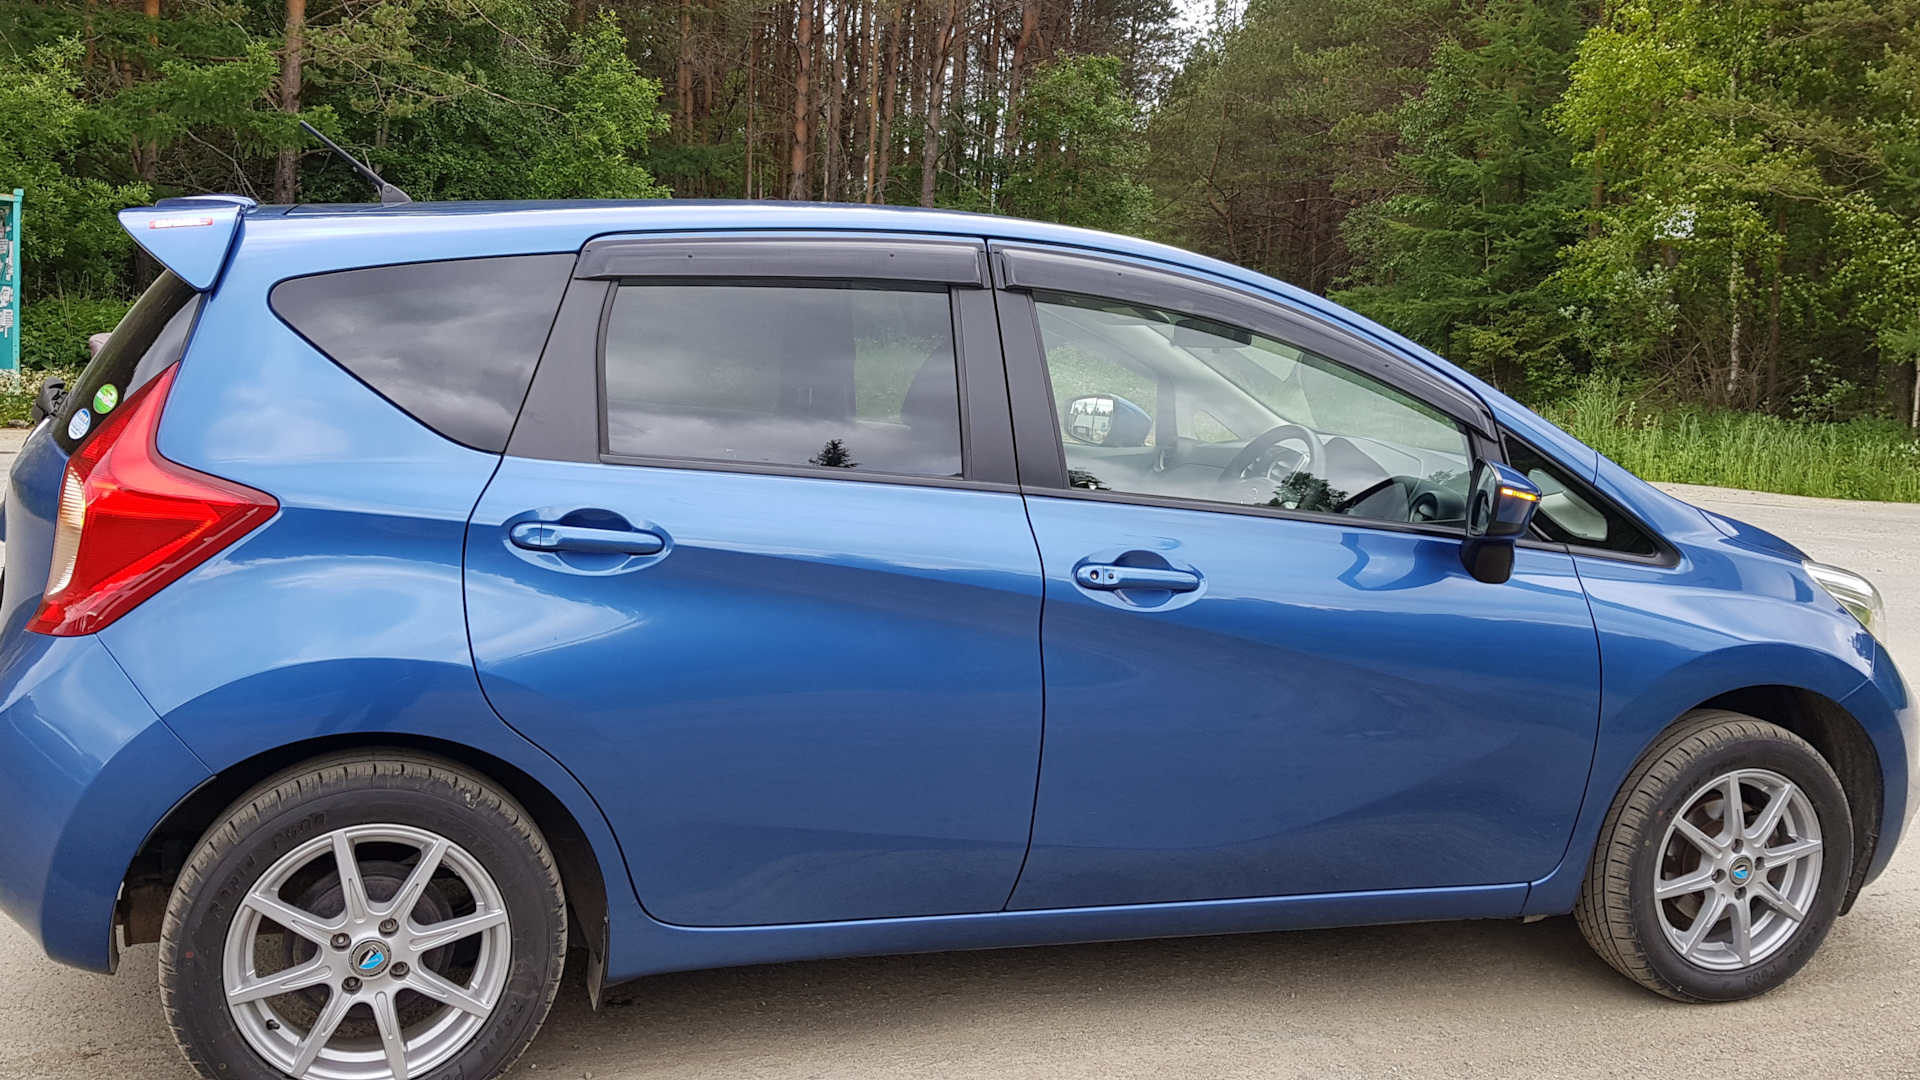 Nissan Note 2g. Ниссан ноут 2. Nissan Note 2g акустика. Nissan Note литые диски.